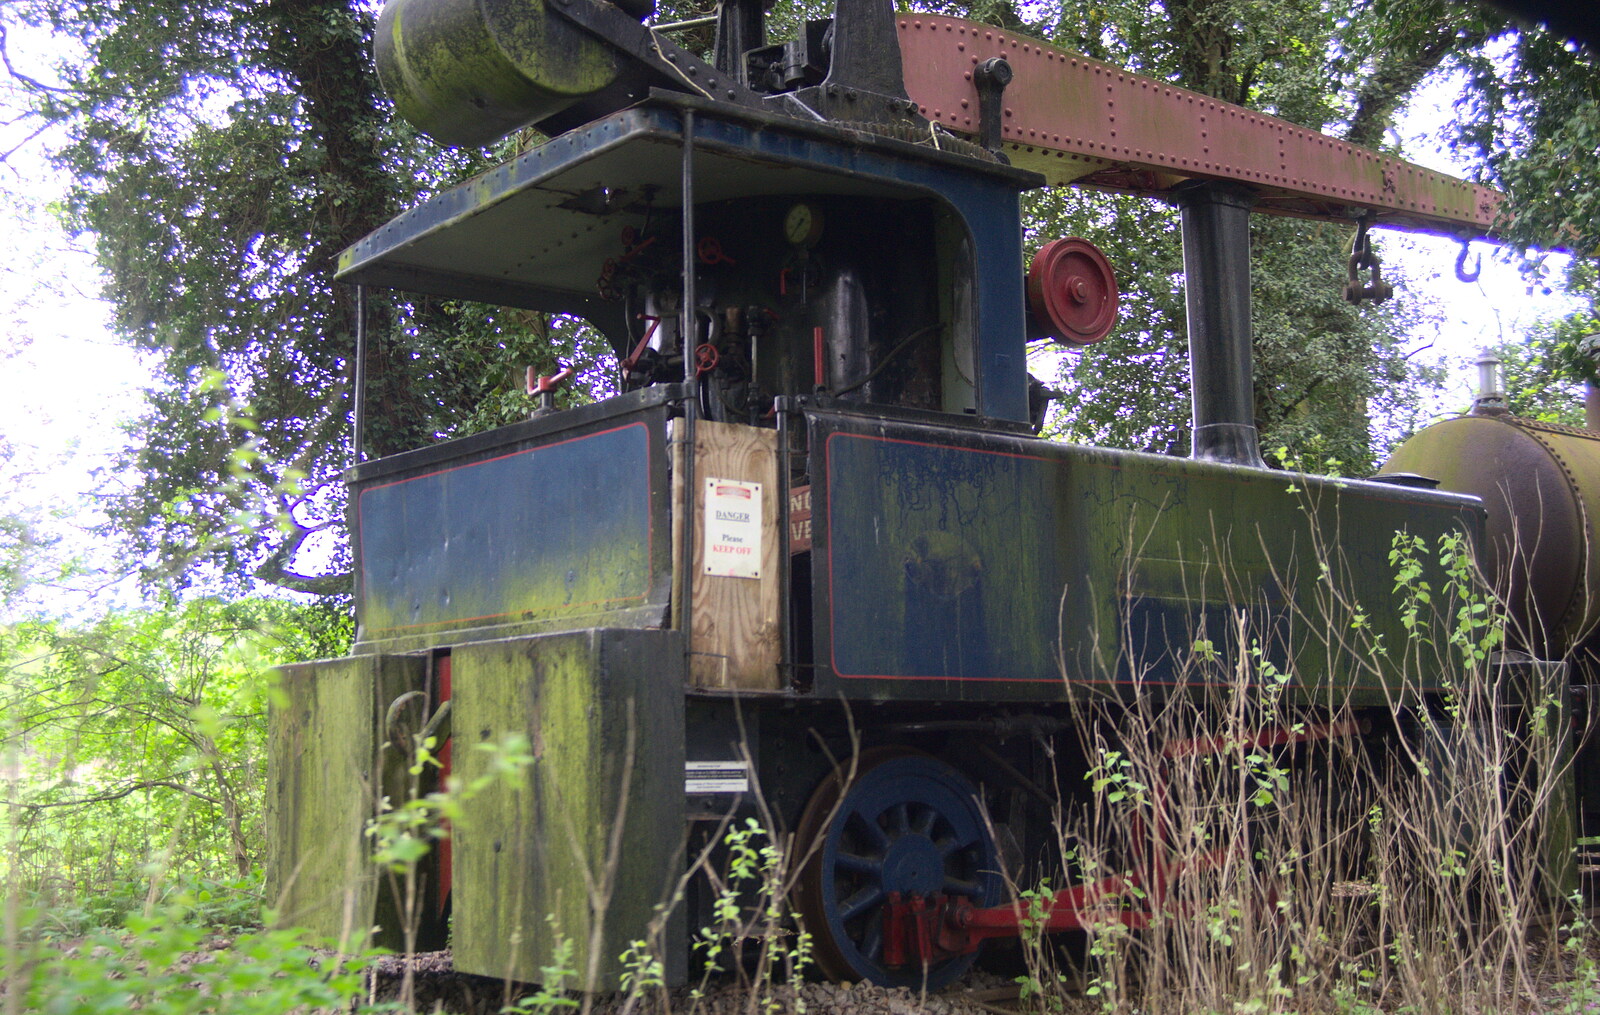 A derelict train crane from A Day at Bressingham Steam and Gardens, Diss, Norfolk - 18th May 2013